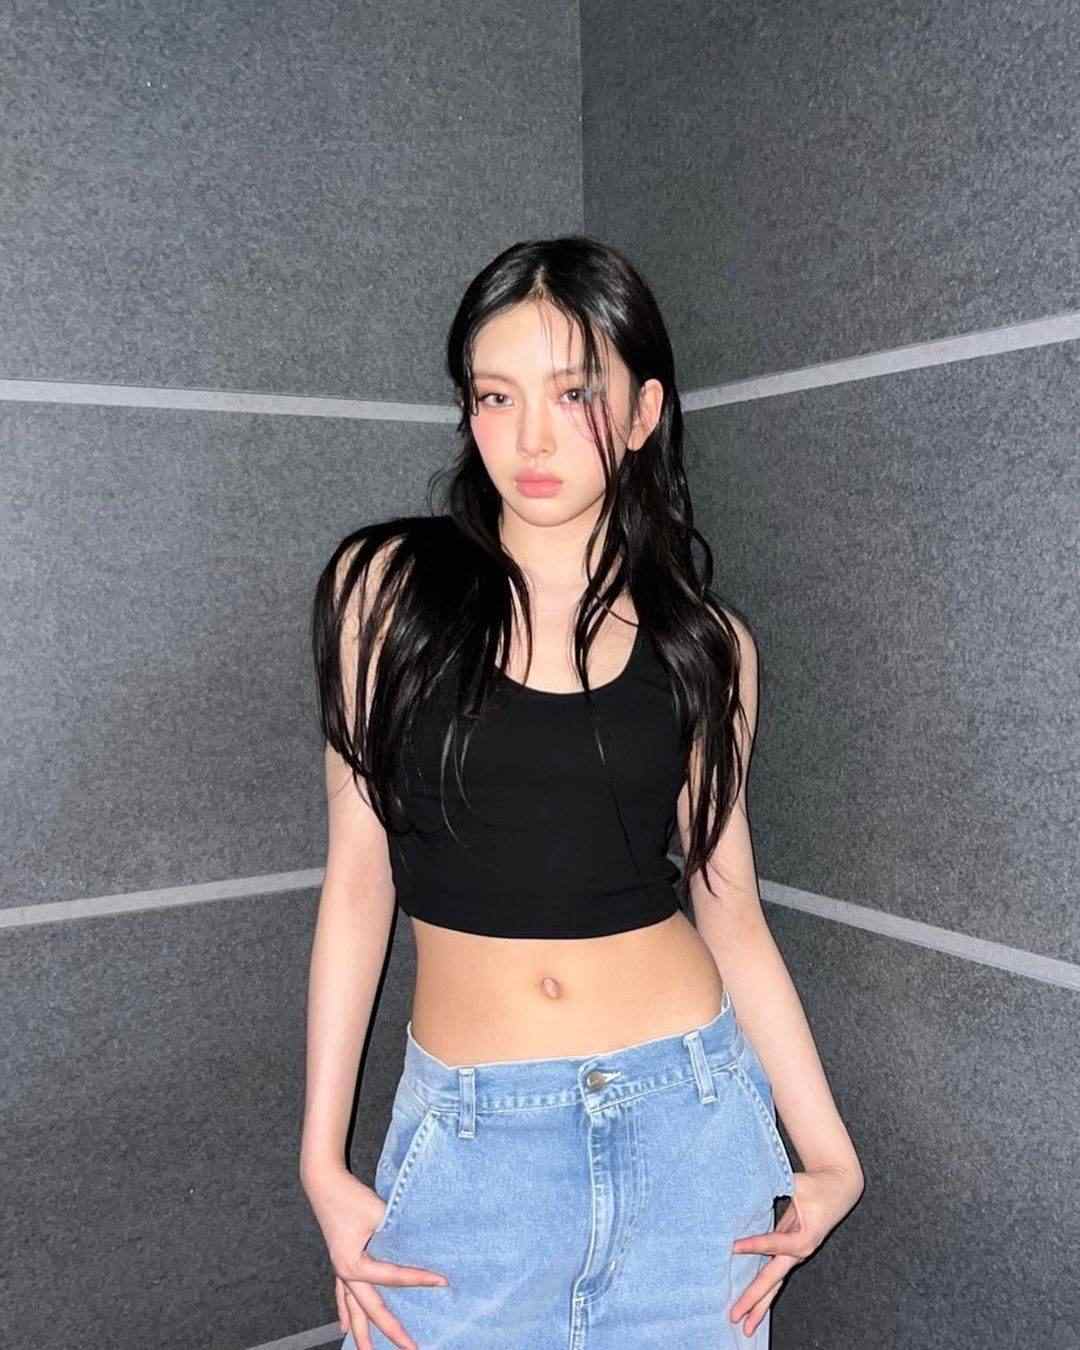 Top 10 Louis Vuitton Outfits NewJeans' Hyein has worn in 2022